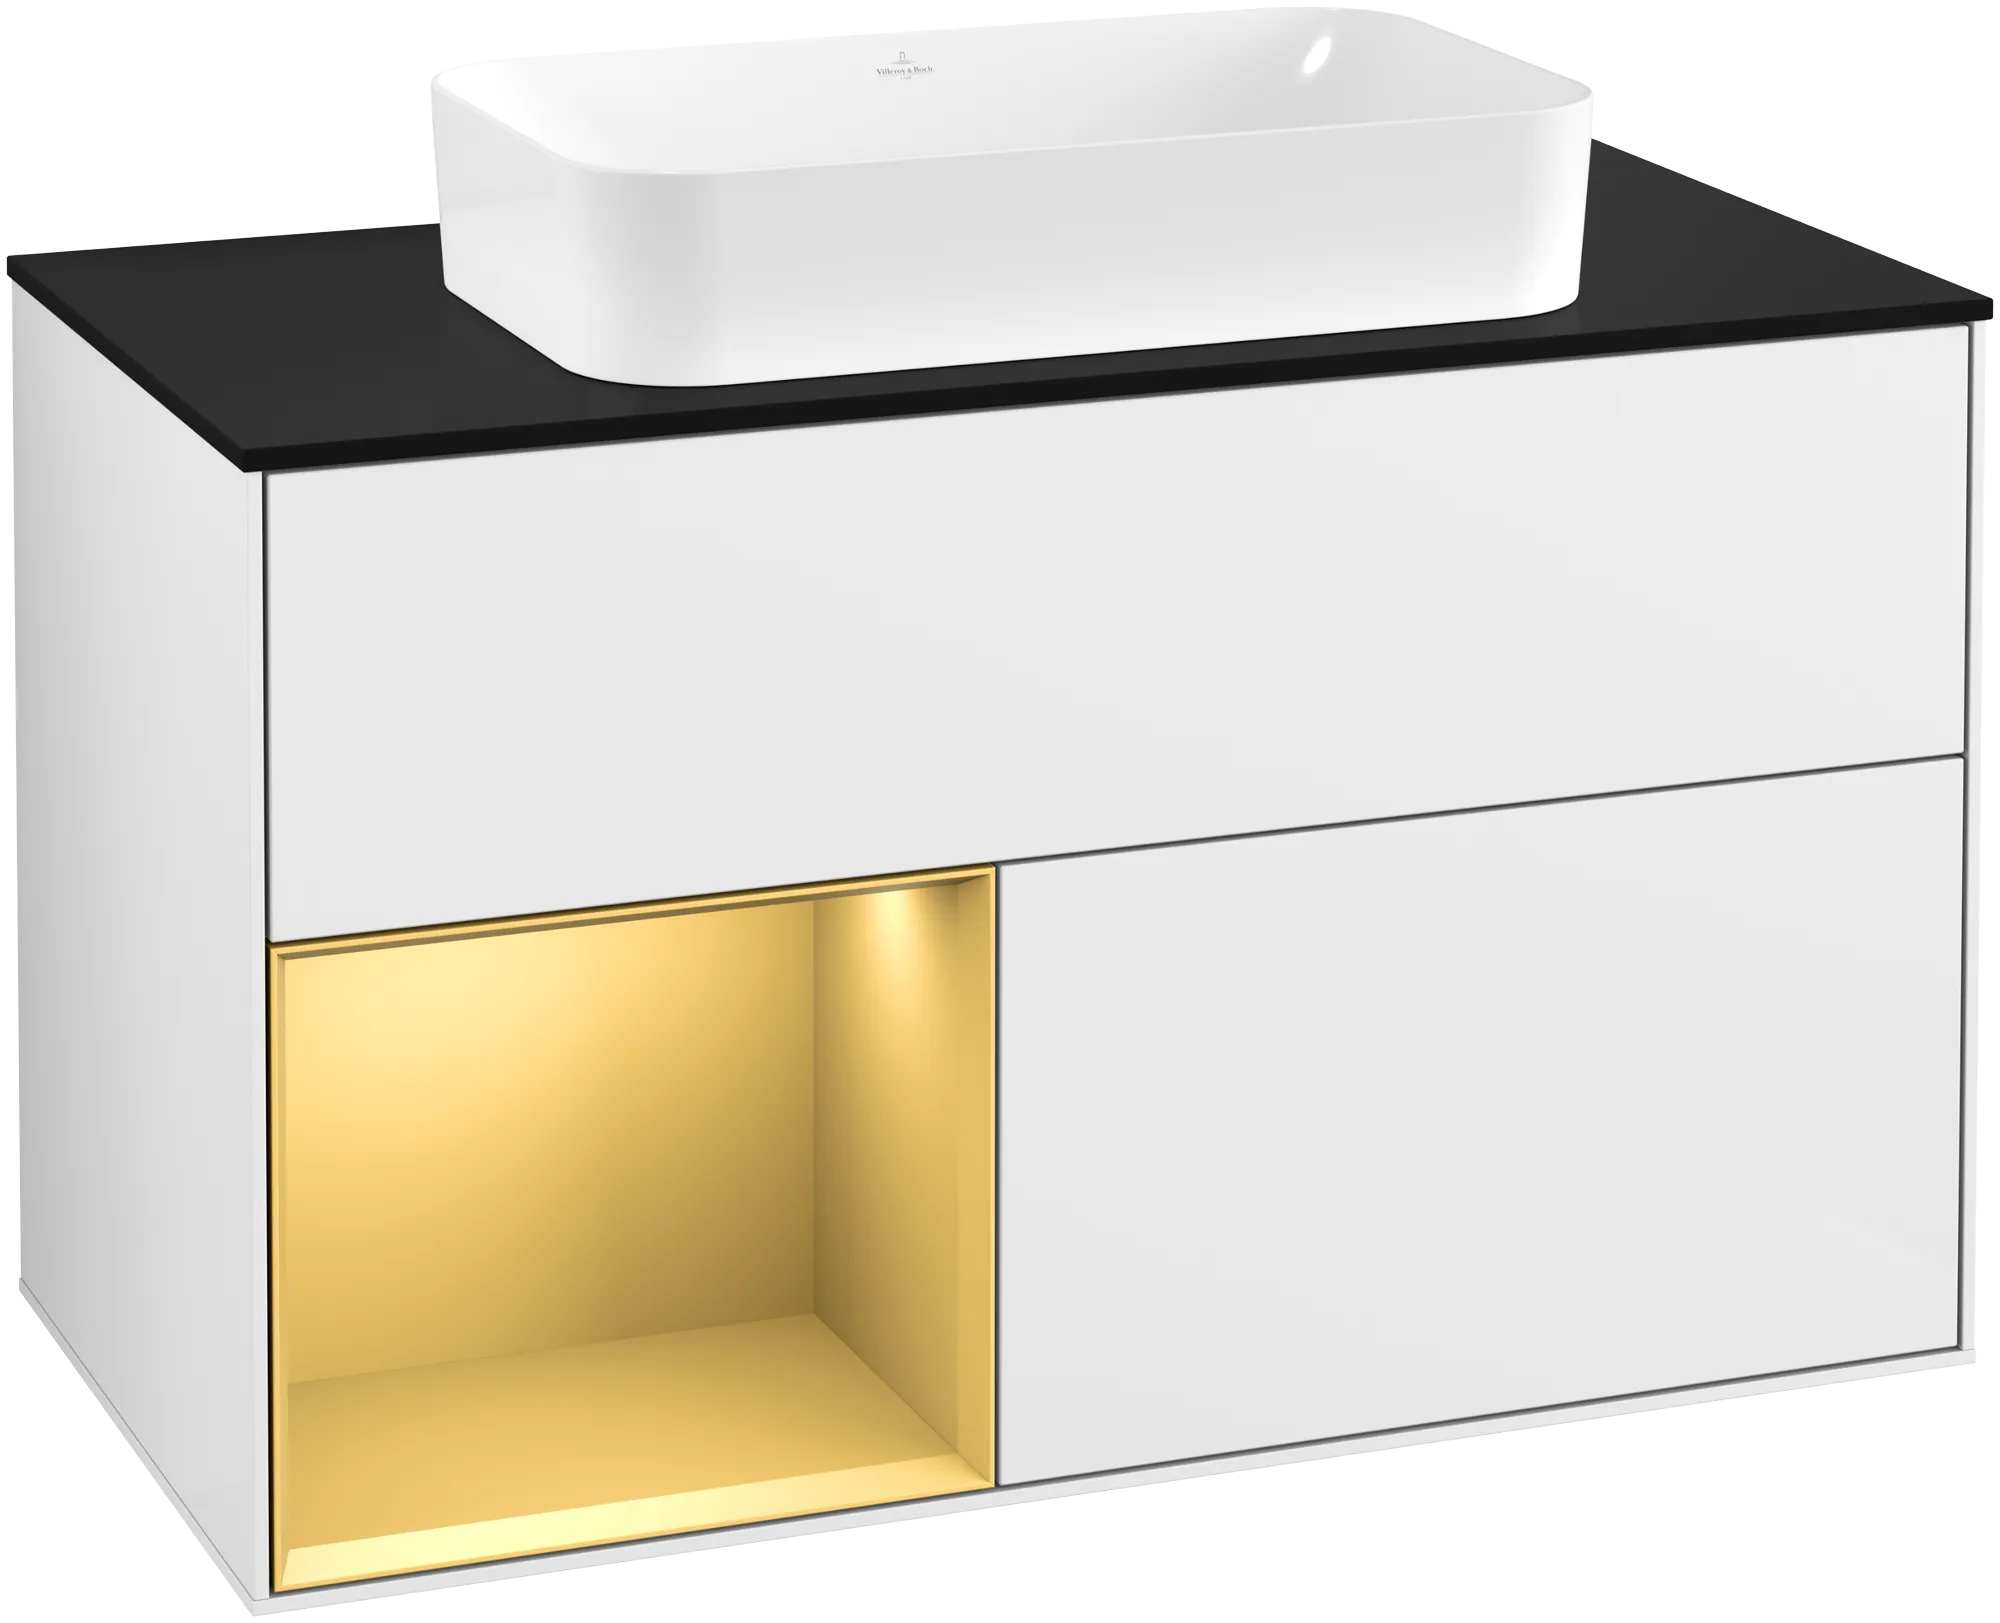 Picture of VILLEROY BOCH Finion Vanity unit, with lighting, 2 pull-out compartments, 1000 x 603 x 501 mm, Glossy White Lacquer / Gold Matt Lacquer / Glass Black Matt #G242HFGF